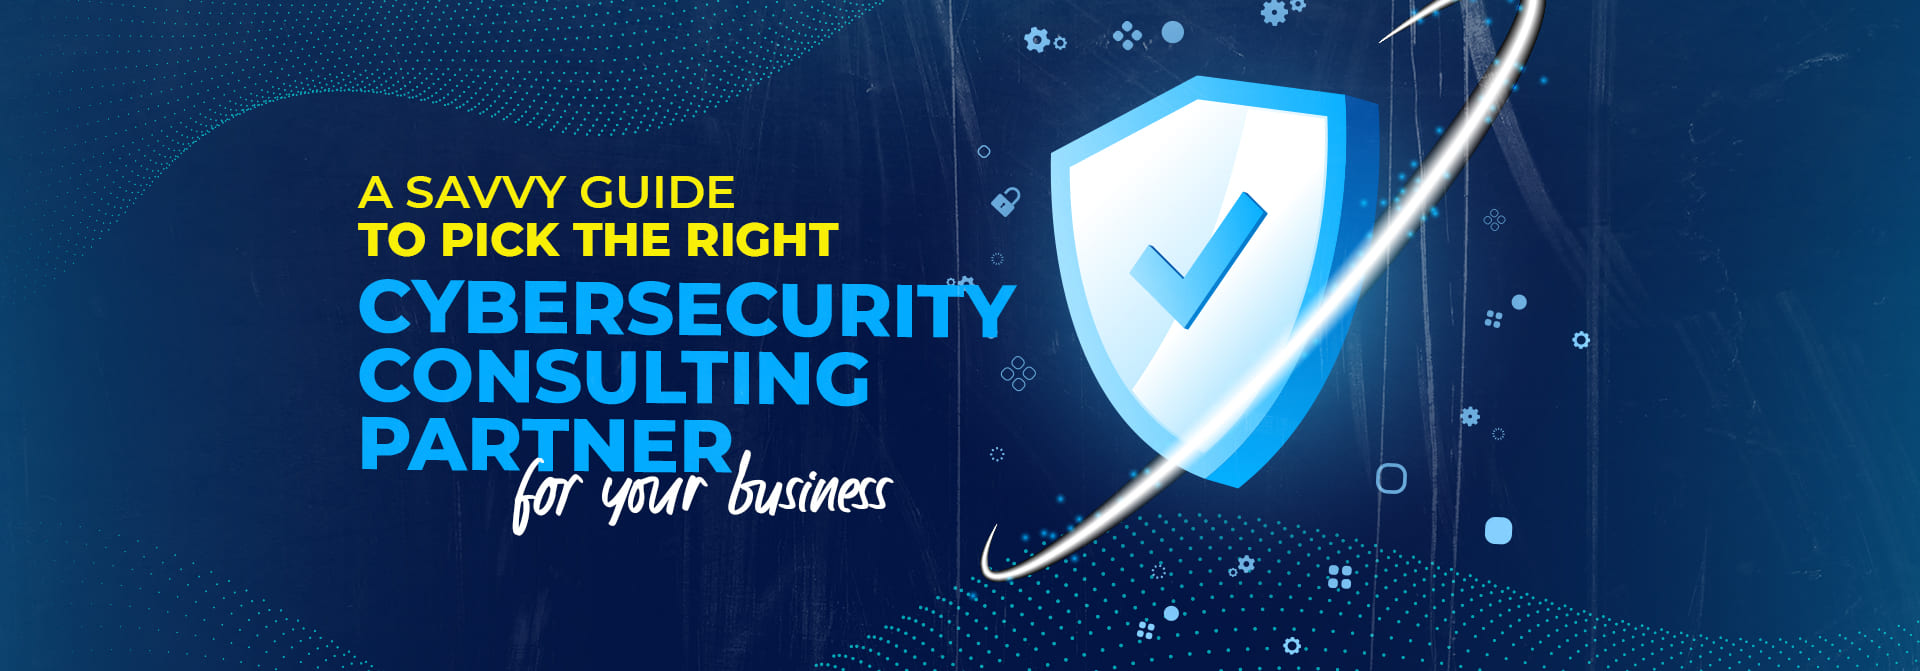 PAC-blog_A-Savvy-Guide-to-Pick-the-Right-Cybersecurity-Consulting-Partner-for-your-Business_main-banner